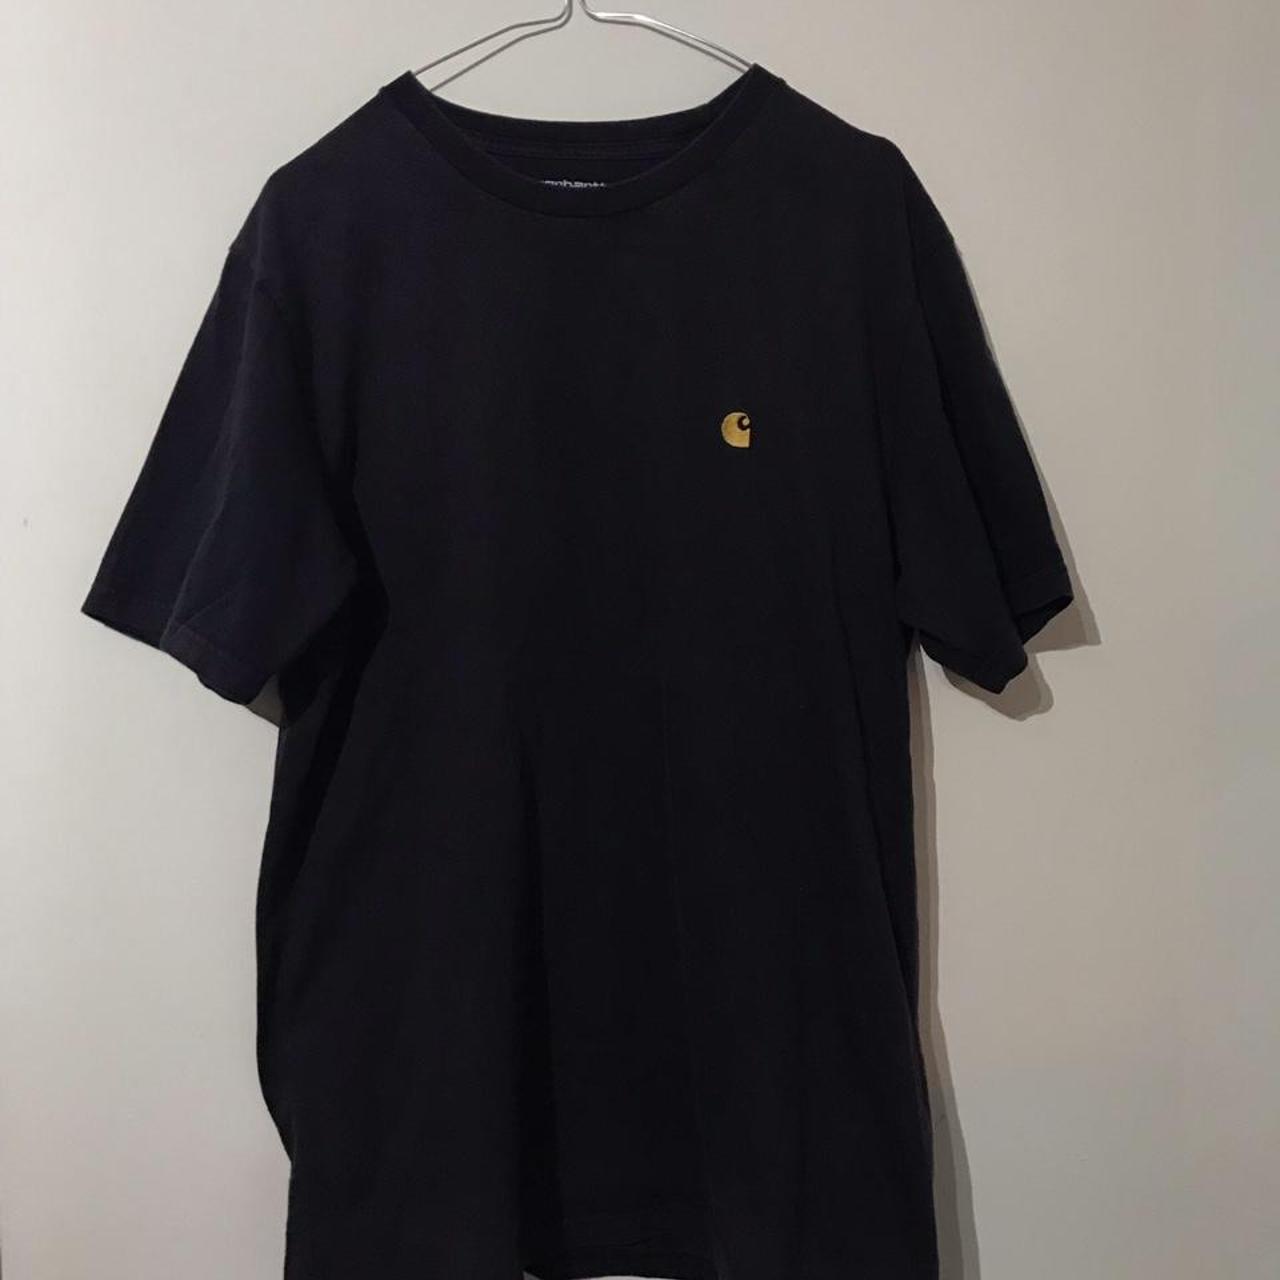 Product Image 1 - Men's carhartt tee

Label size large